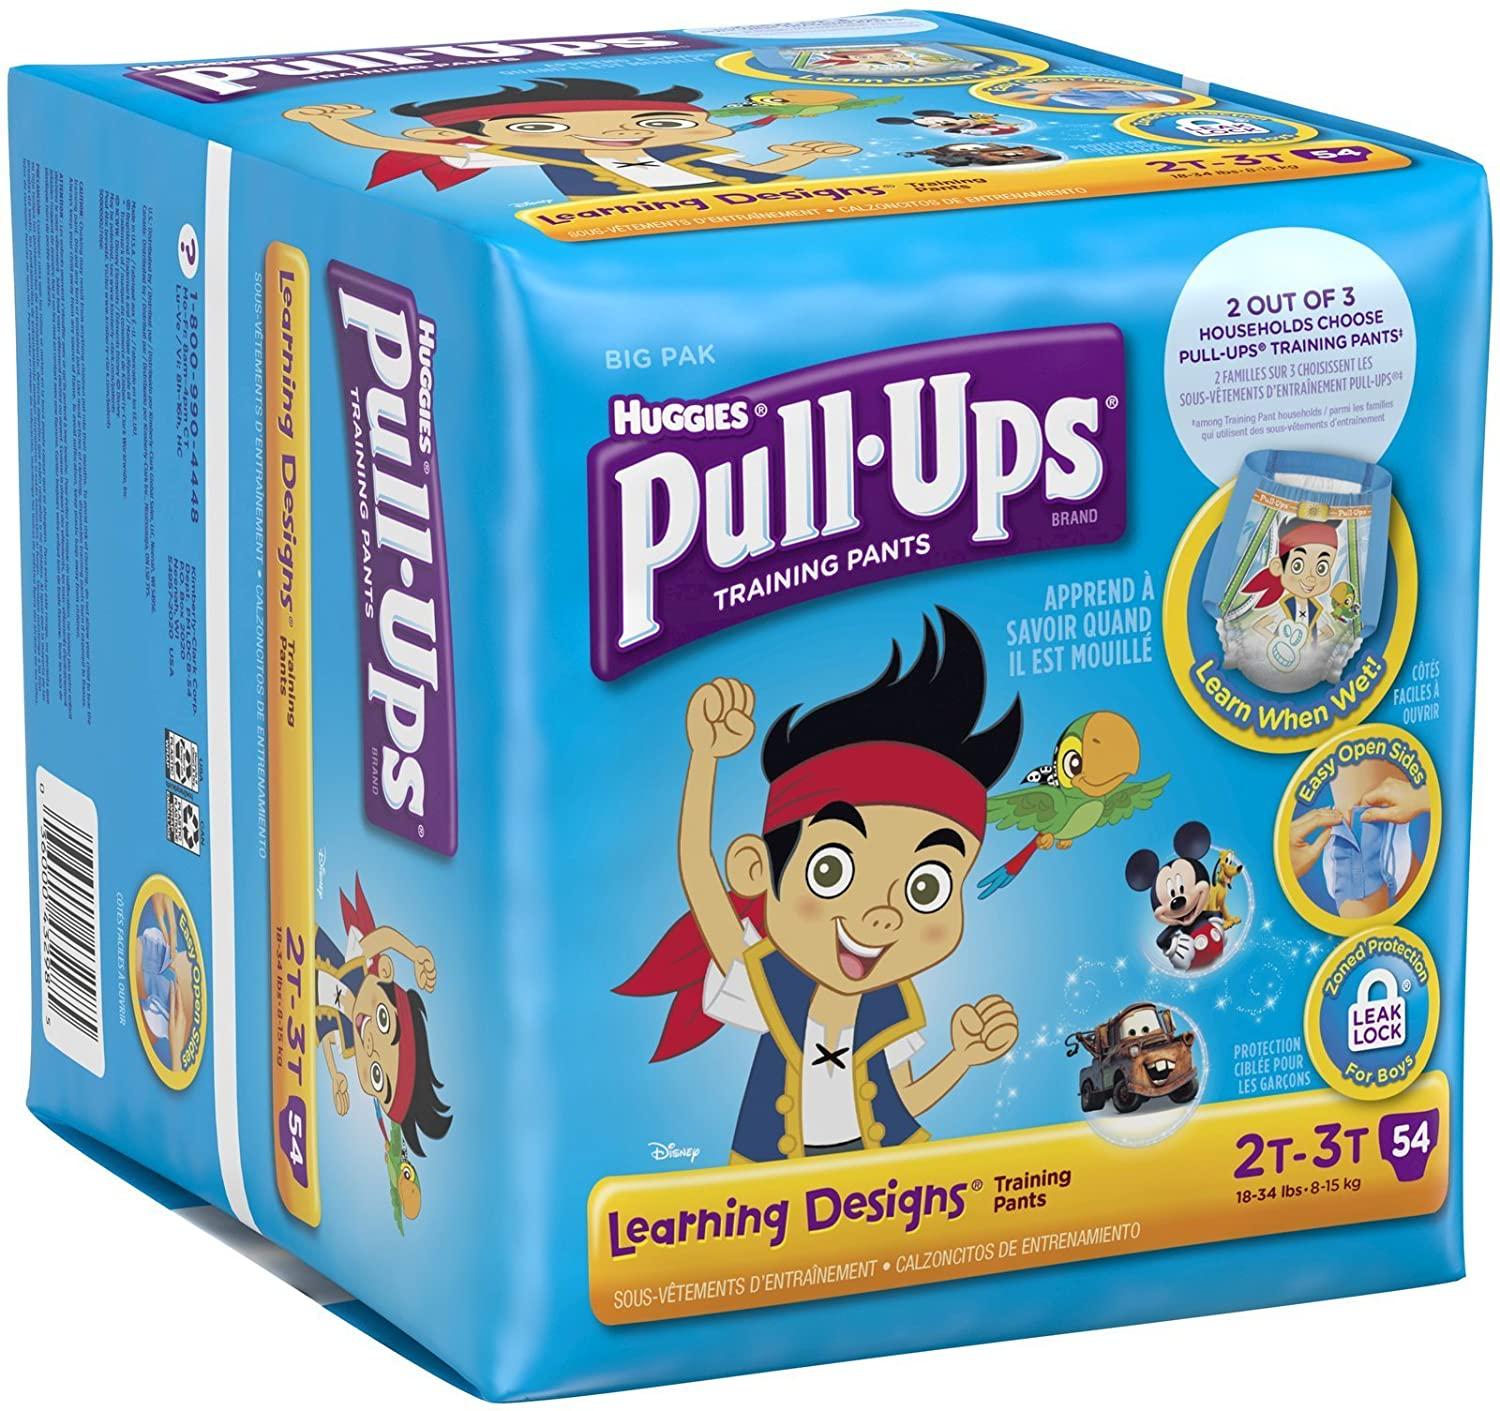 Huggies Pull-Ups Training Pants Learning Designs, Boys, 2T-3T, 54 Count